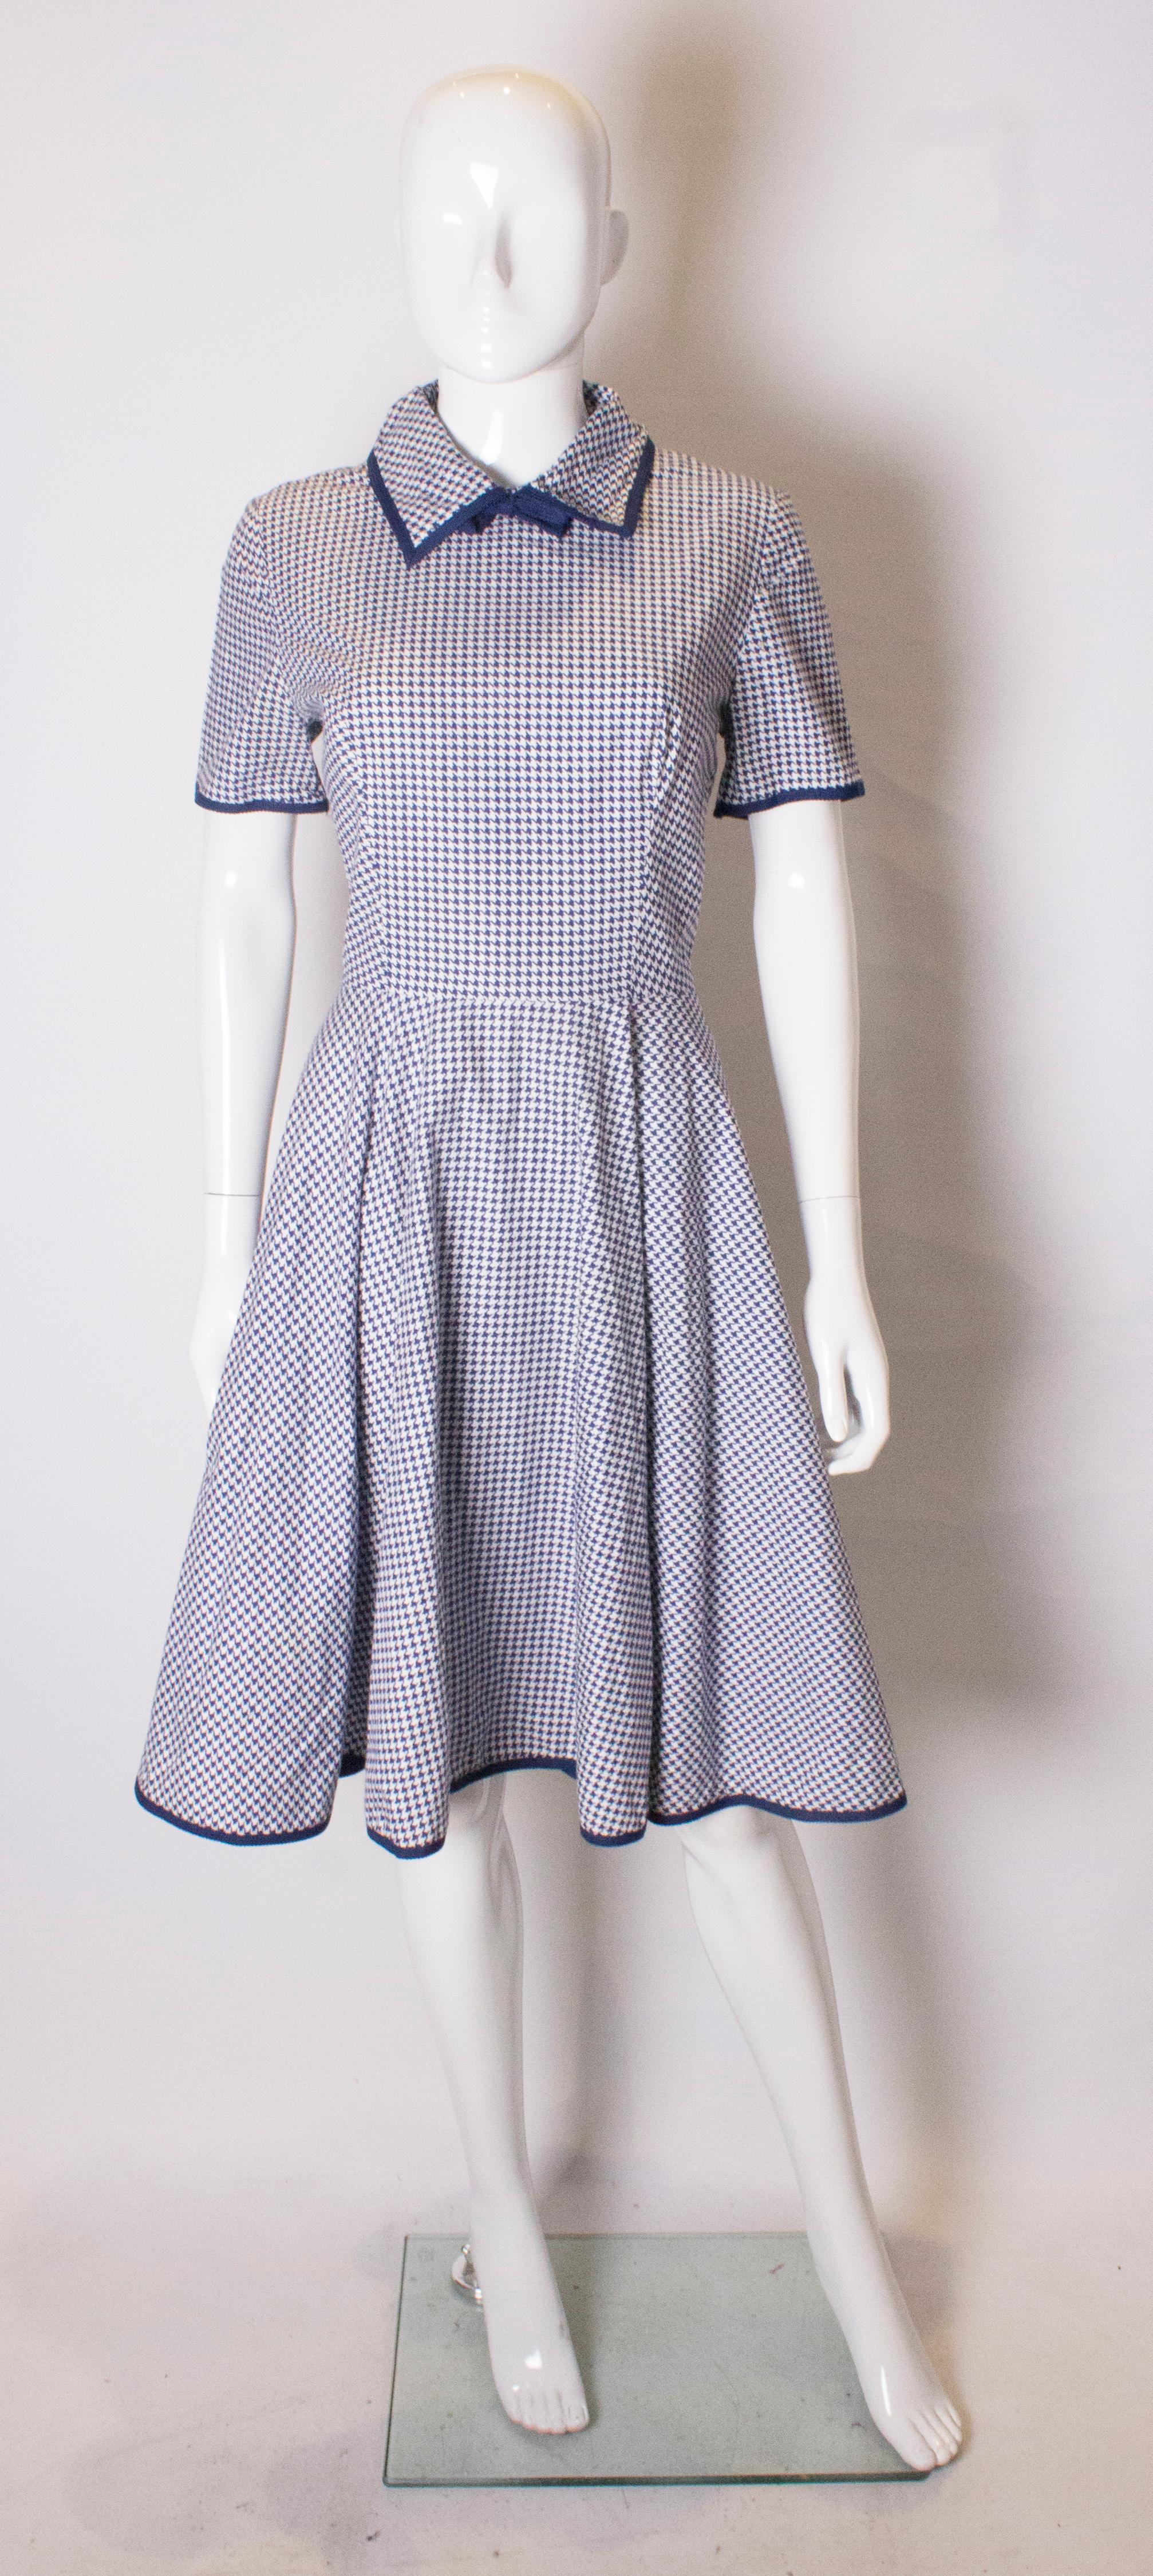 
A vintage 'California '  blue and white cotton dress. It has a small collar, central back zip and a full skirt.